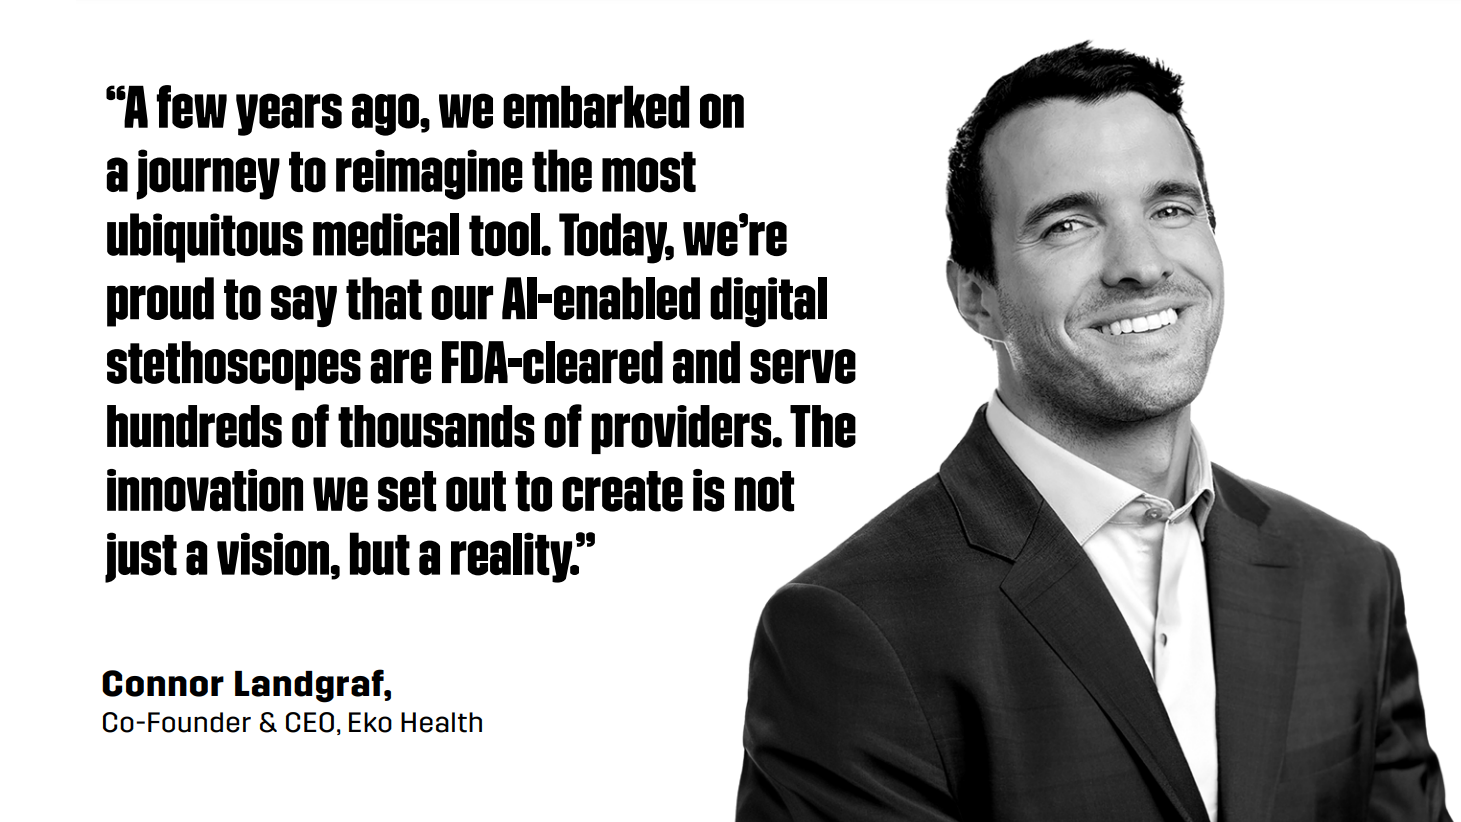 “A few years ago, we embarked on a journey to reimagine the most ubiquitous medical tool. Today, we’re proud to say that our AI-enabled digital stethoscopes are FDA-cleared and serve hundreds of thousands of providers. The innovation we set out to create is not just a vision, but a reality.” - Connor Landgraf, Co-Founder & CEO, Eko Health